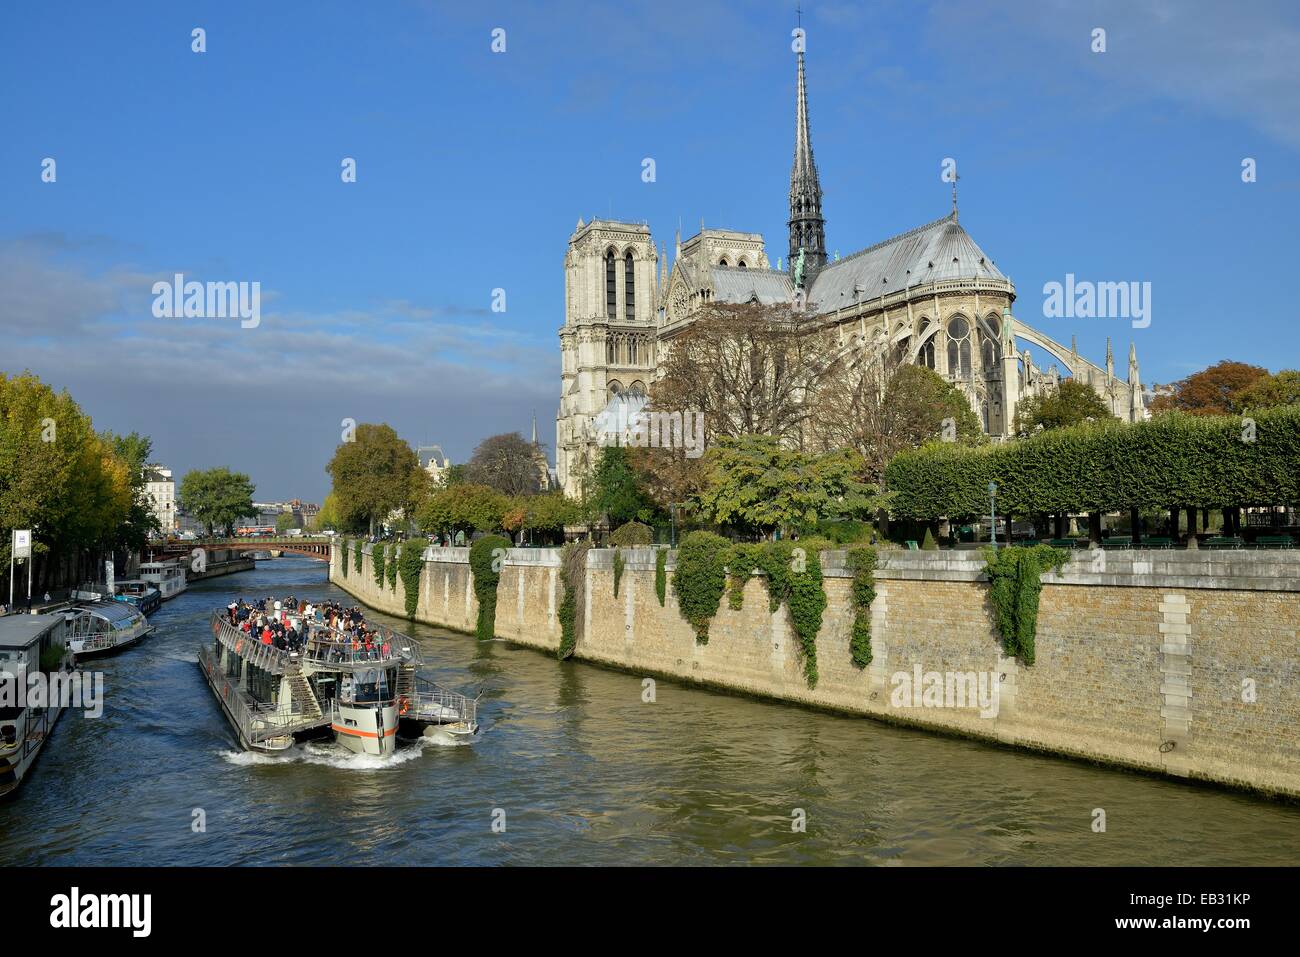 Sightseeing boat on the Seine river in front of Notre Dame Cathedral, Paris, France Stock Photo